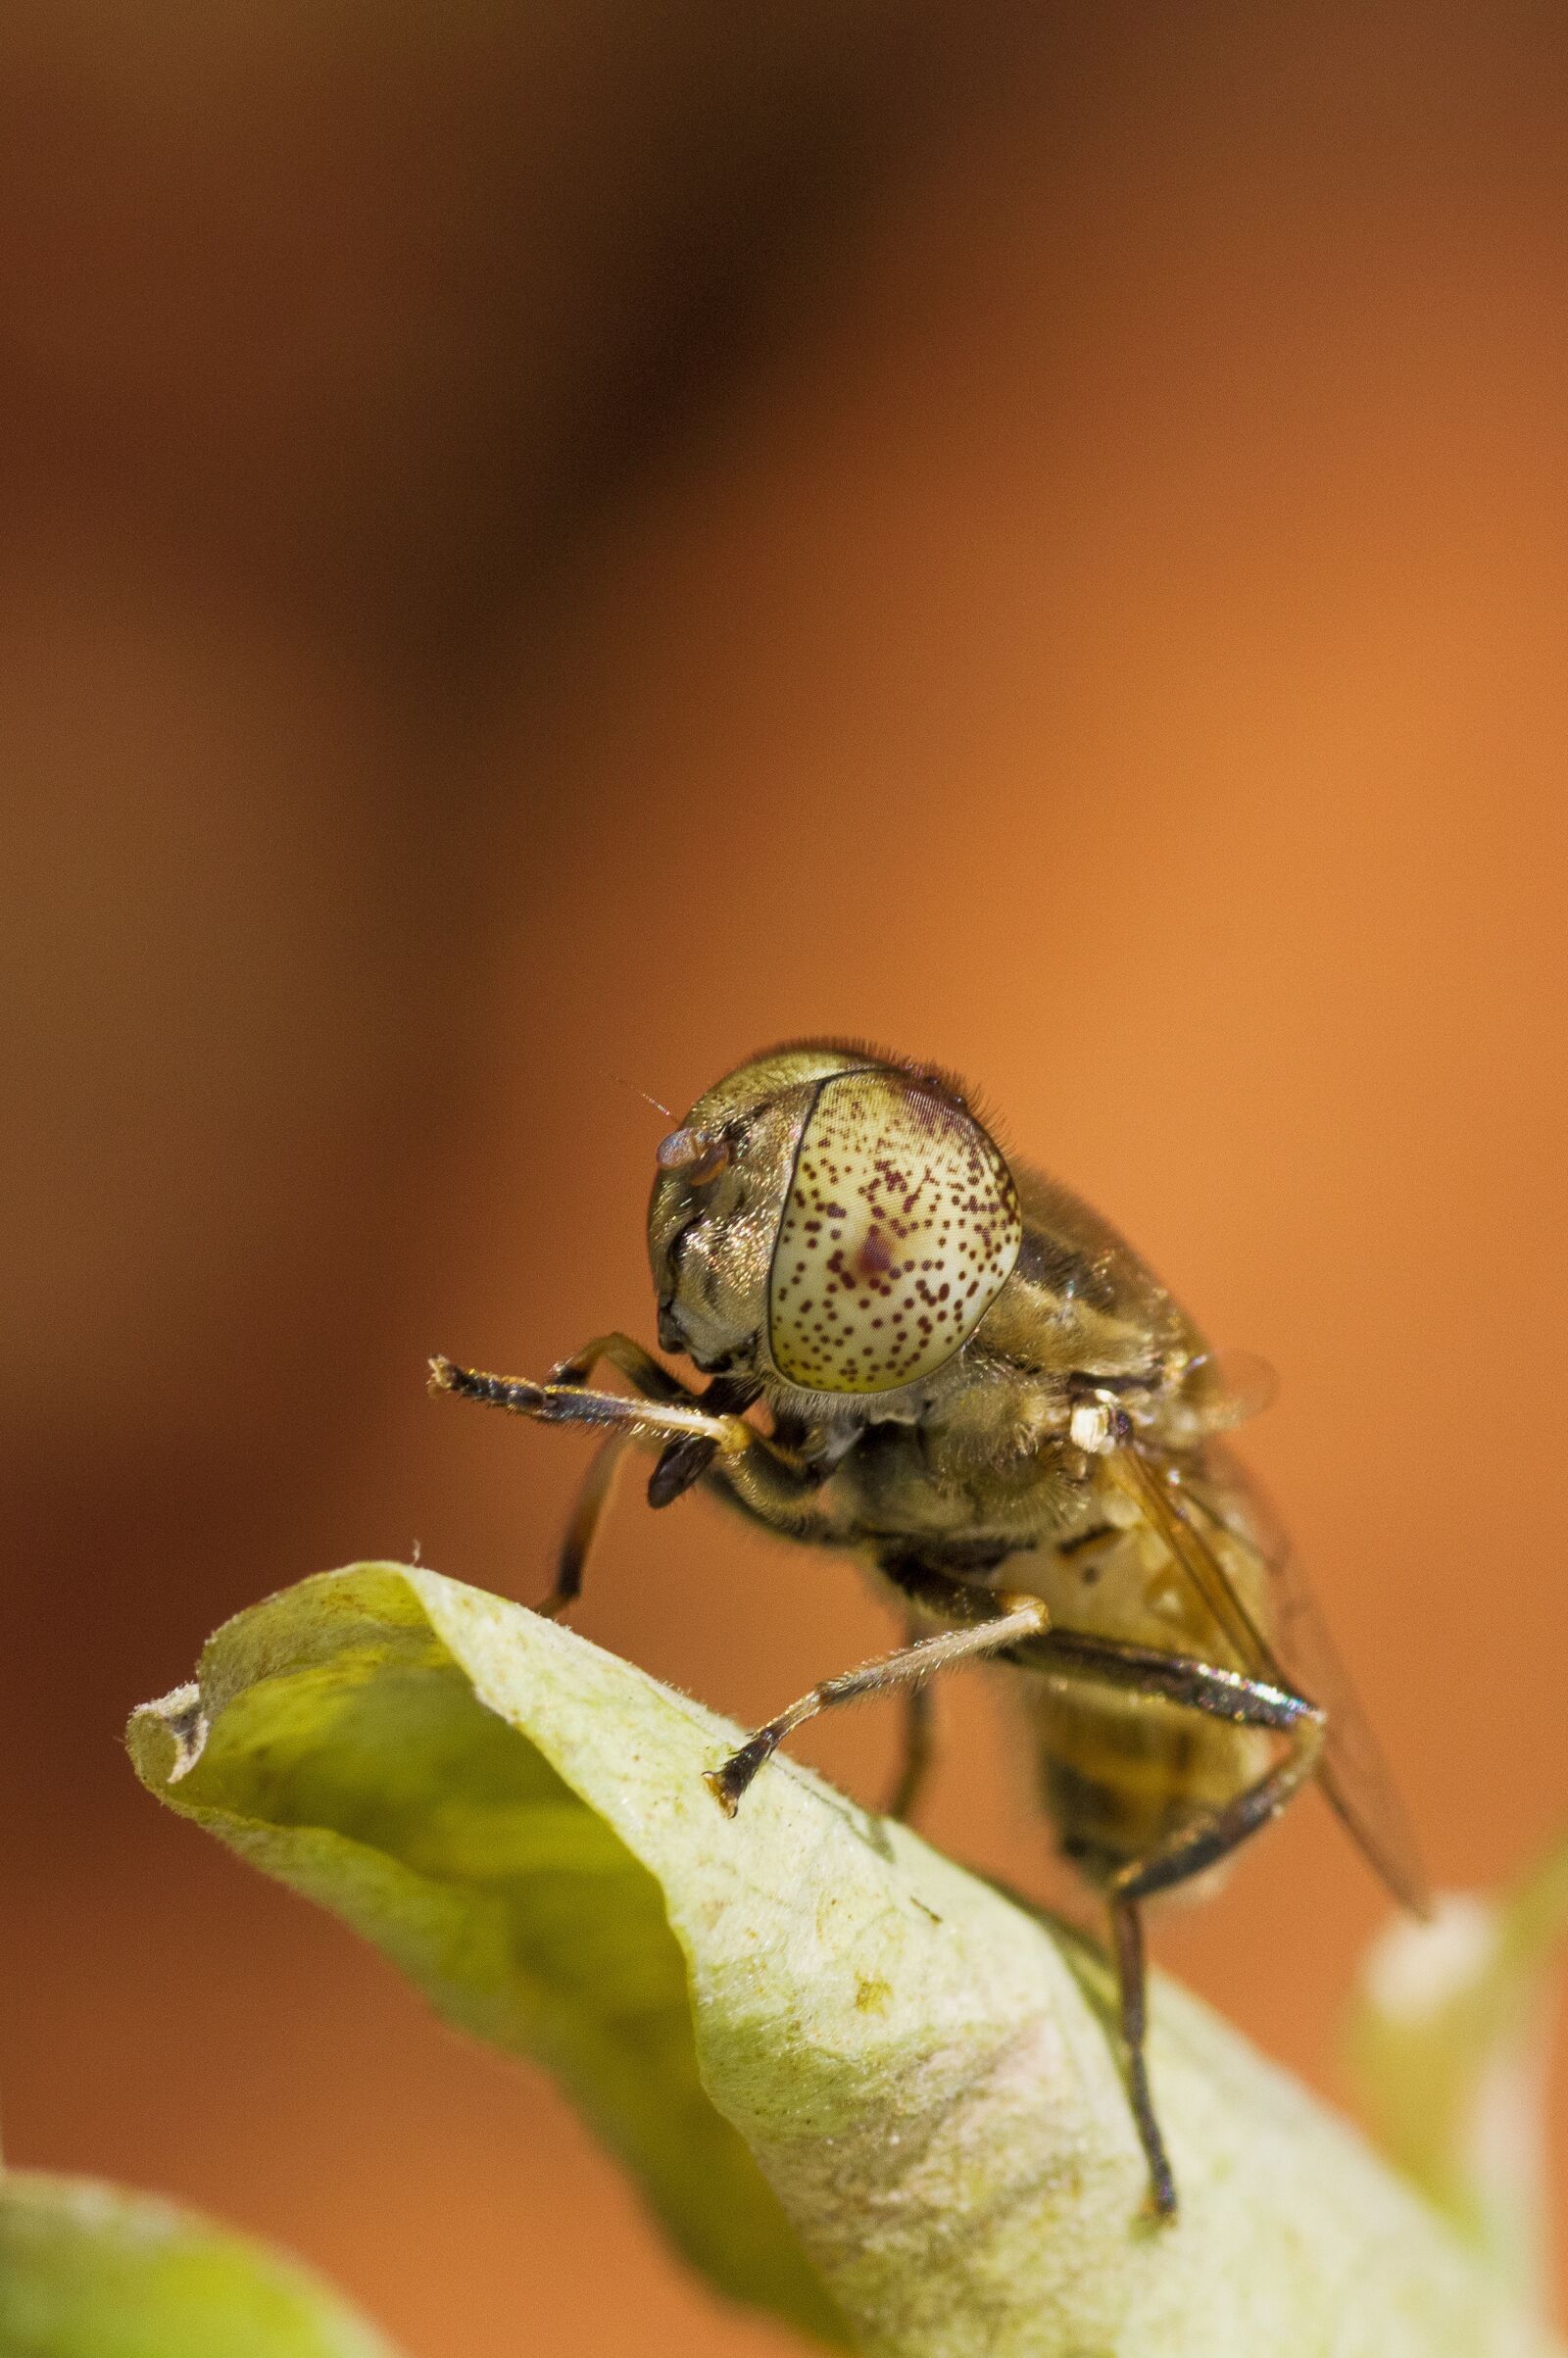 Pentax K-3 + Tamron SP AF 90mm F2.8 Di Macro sample photo. Fly, spotted eyes, macro photography